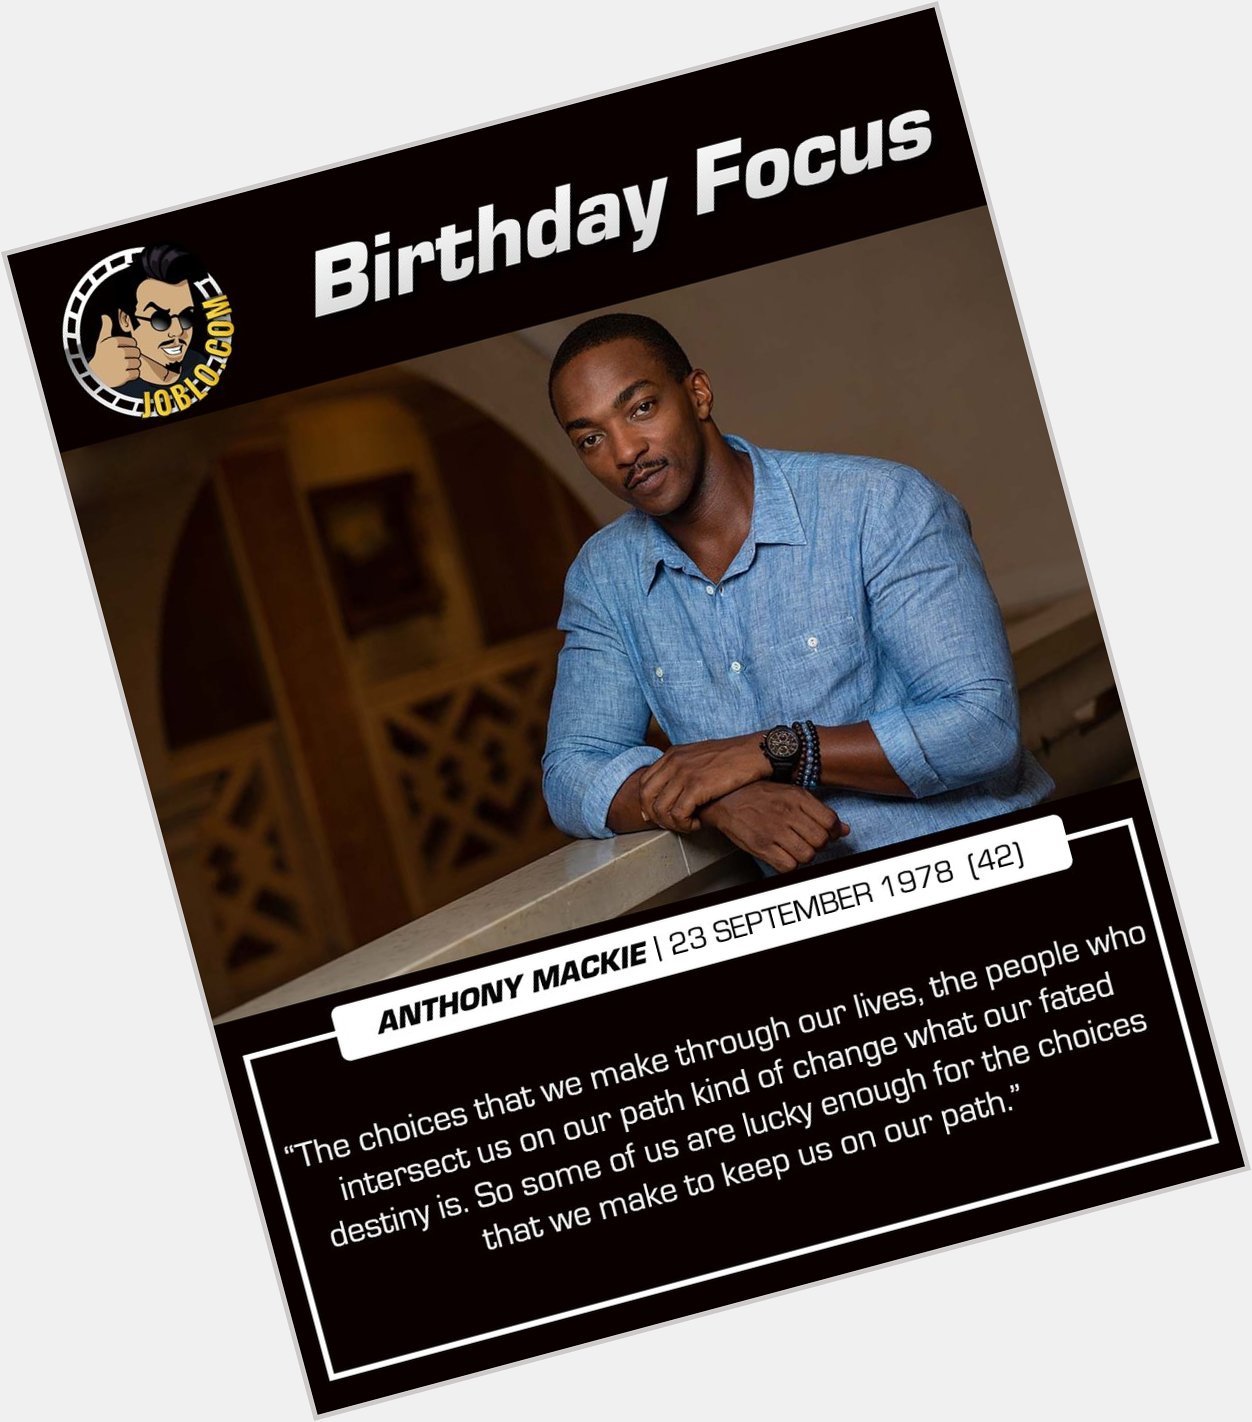 Happy 42nd birthday to Anthony Mackie!

Who is excited to see him in The Falcon and the Winter Soldier? 